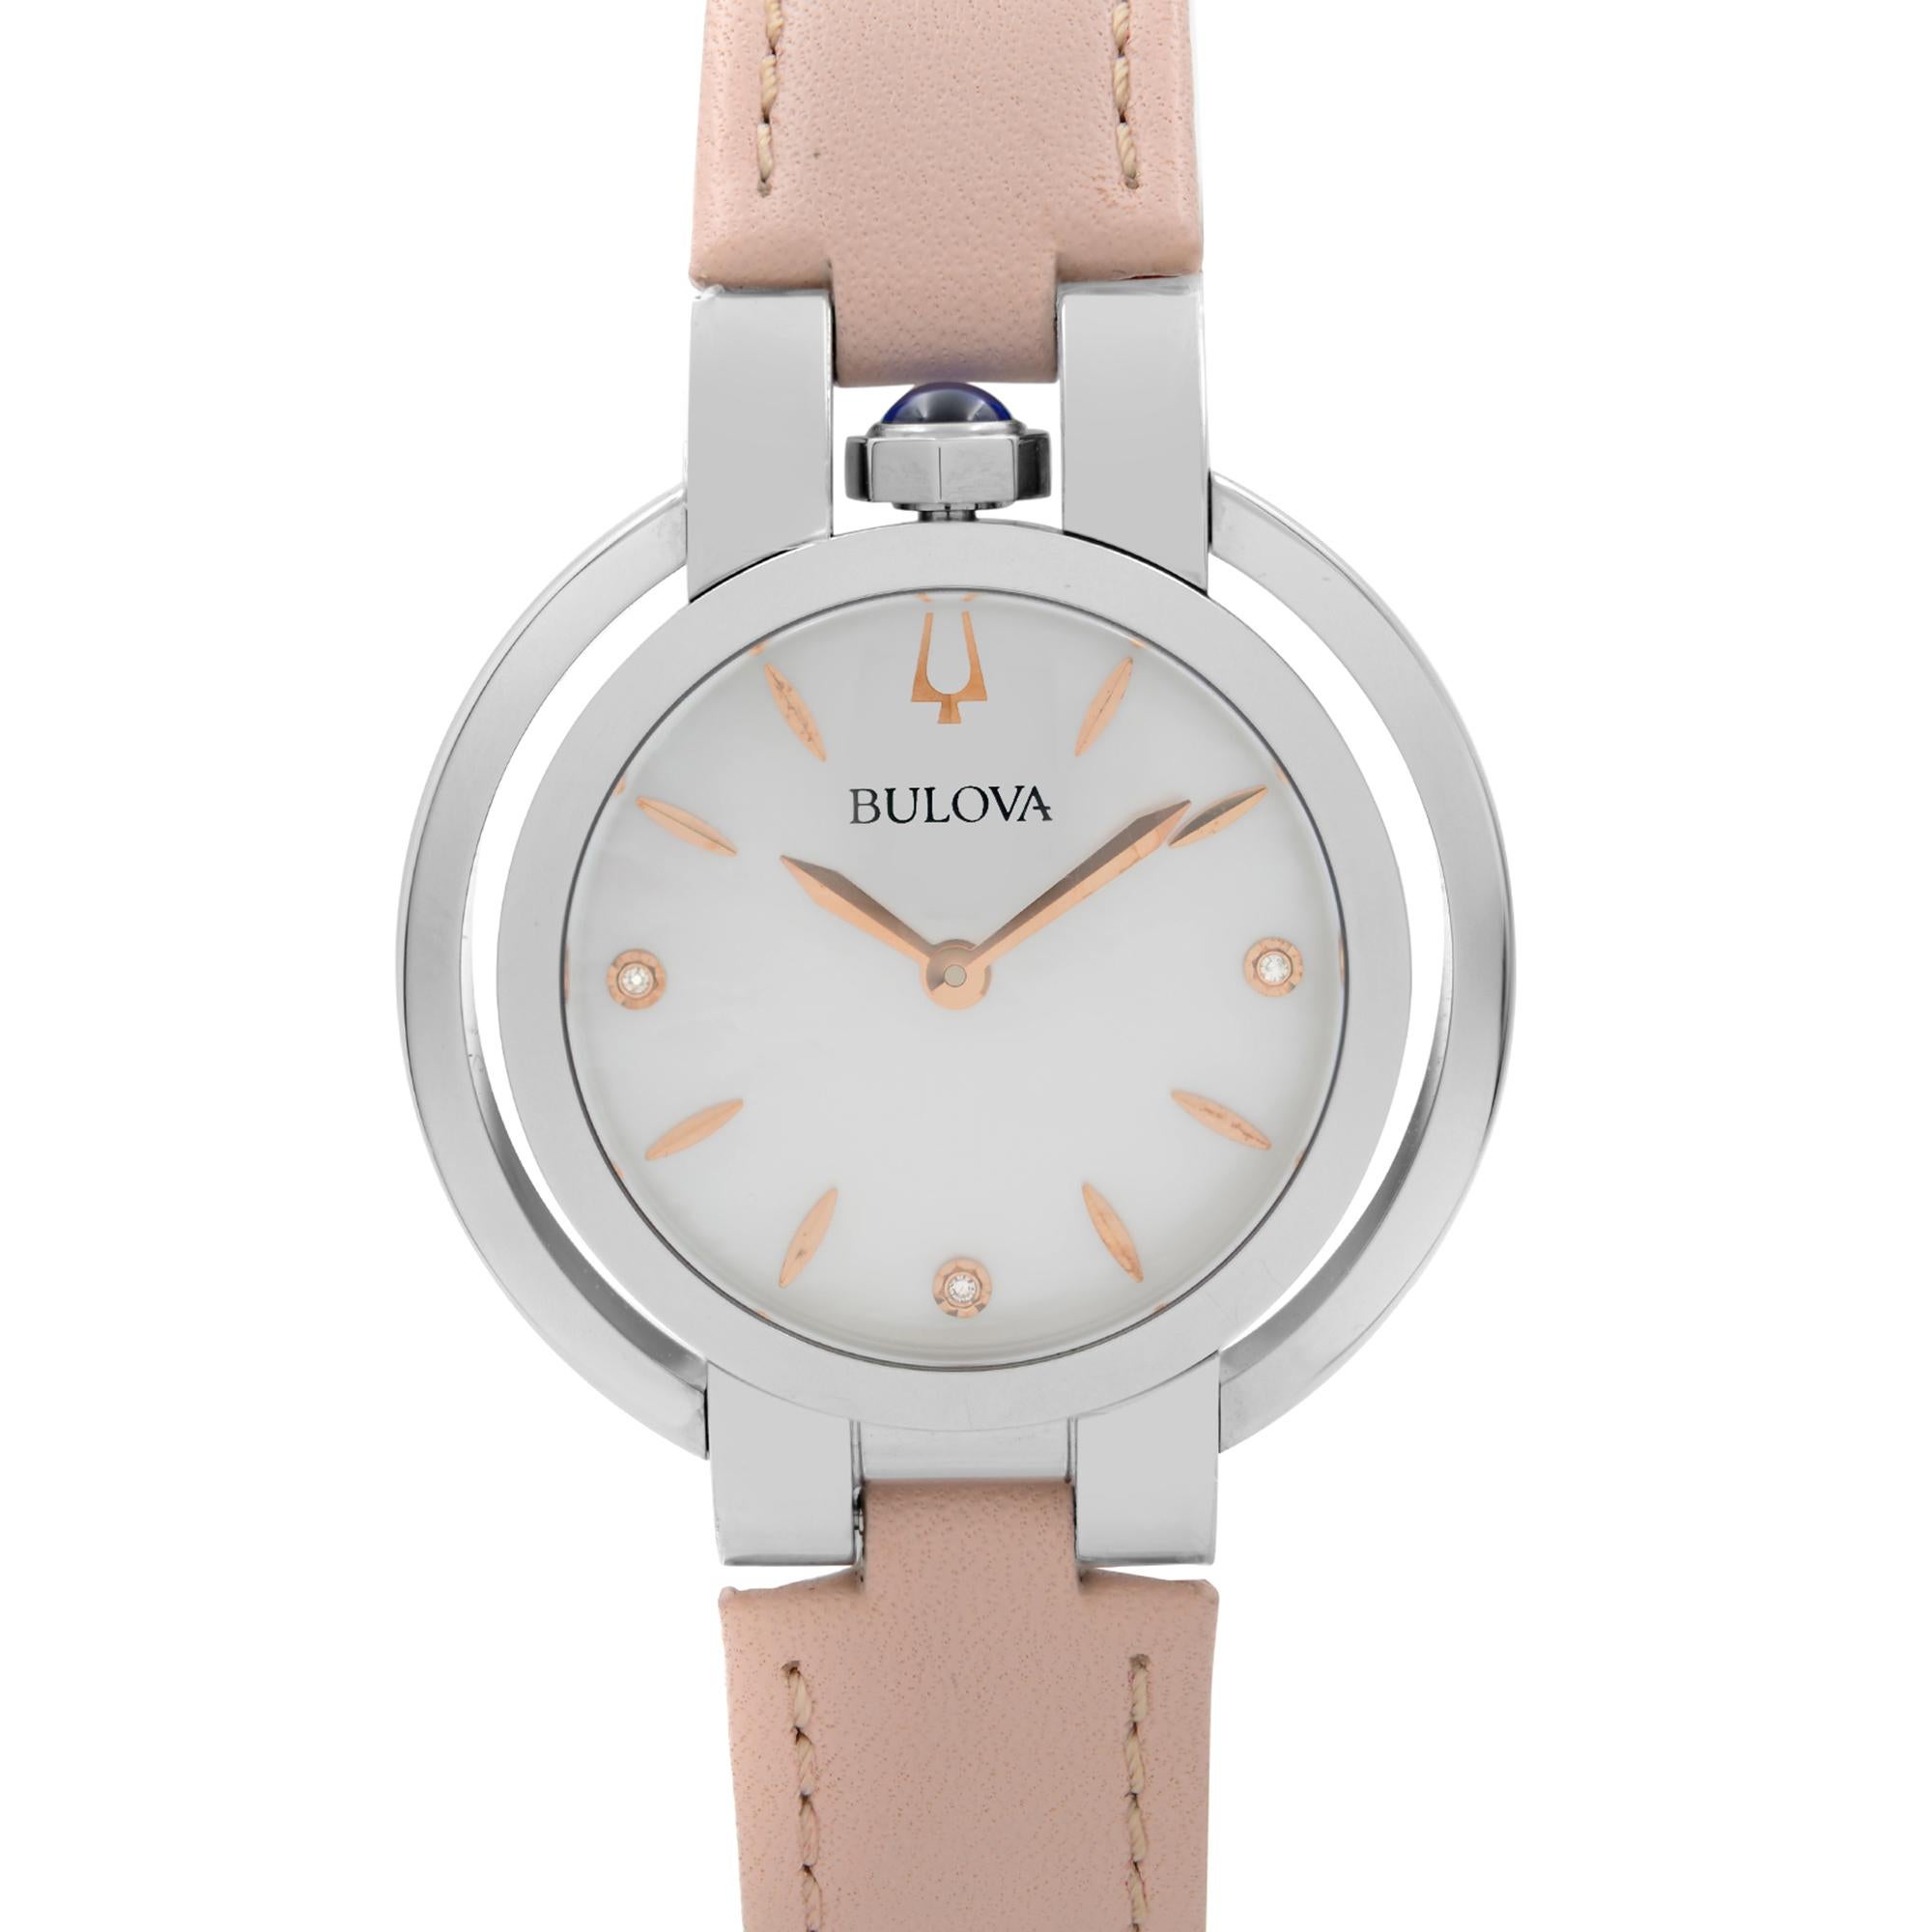 Unworn Bulova Rubaiyat Diamond Accent Steel Pink Strap Quartz Ladies Watch 96P197. The Watch Might Have Miss a Tag. This Beautiful Timepiece Features: Stainless Steel Case with a Pink Leather Strap, Fixed Stainless Steel Bezel, White Mother of Pearl